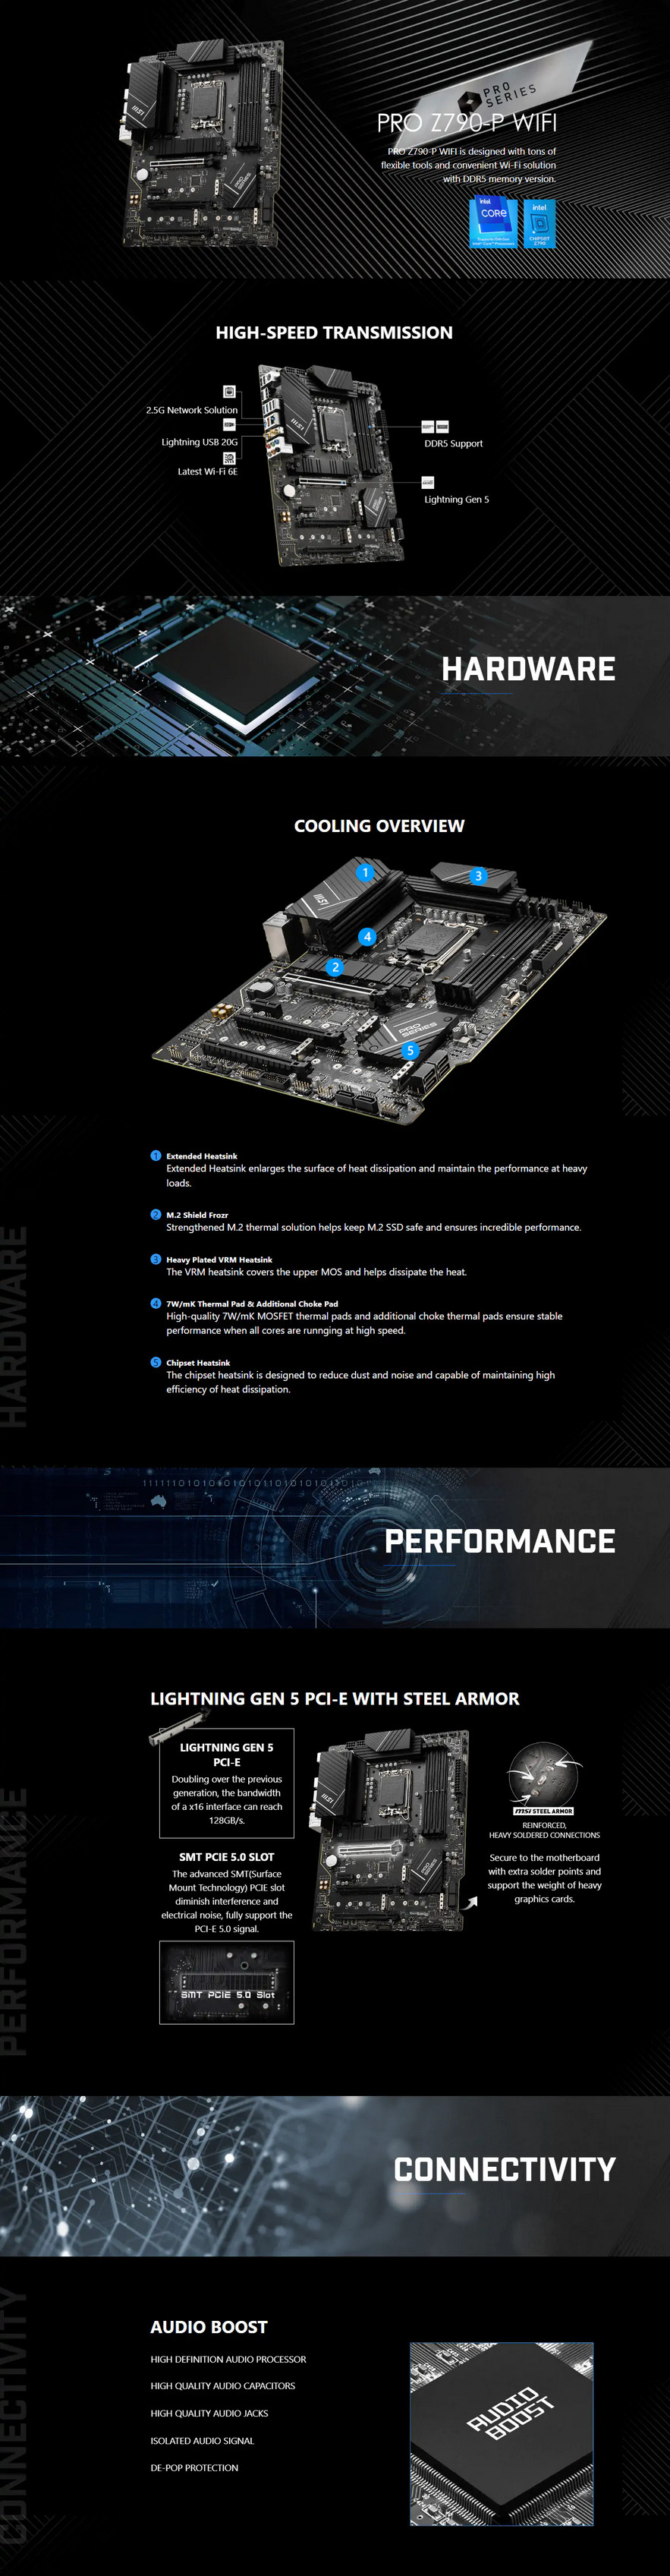 A large marketing image providing additional information about the product MSI PRO Z790-P WiFi LGA1700 ATX Desktop Motherboard - Additional alt info not provided